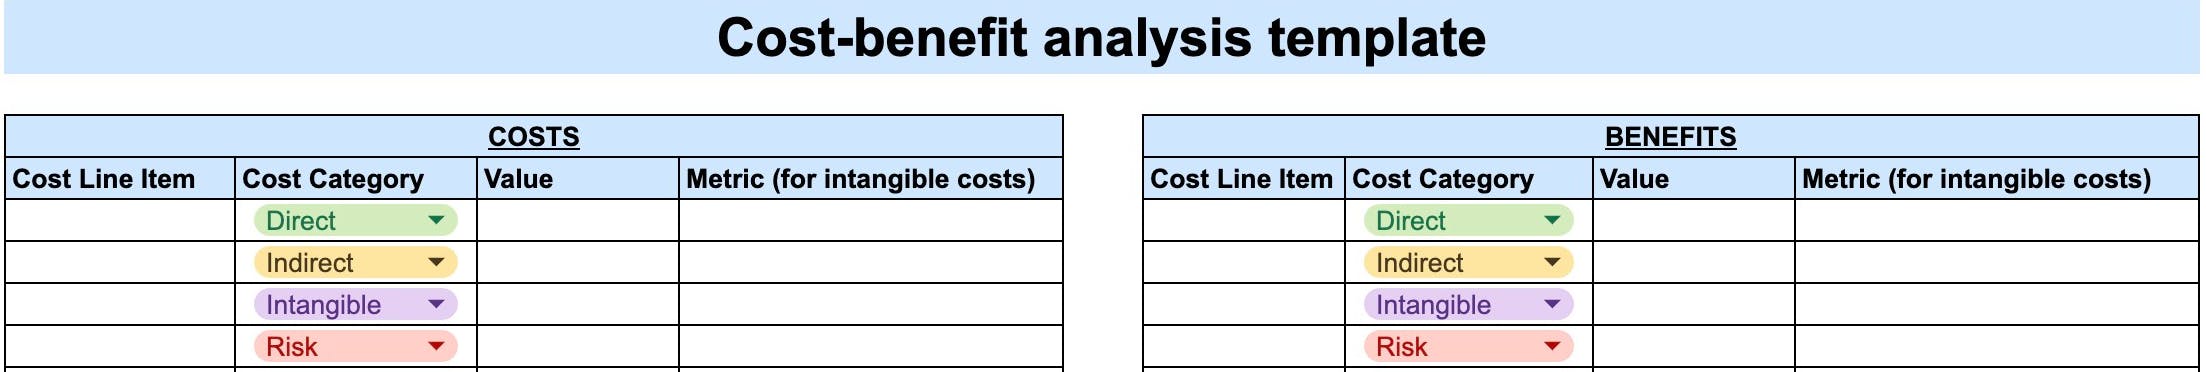 a screenshot of what the cost benefit analysis template looks like with two columns, one for costs and one for benefits